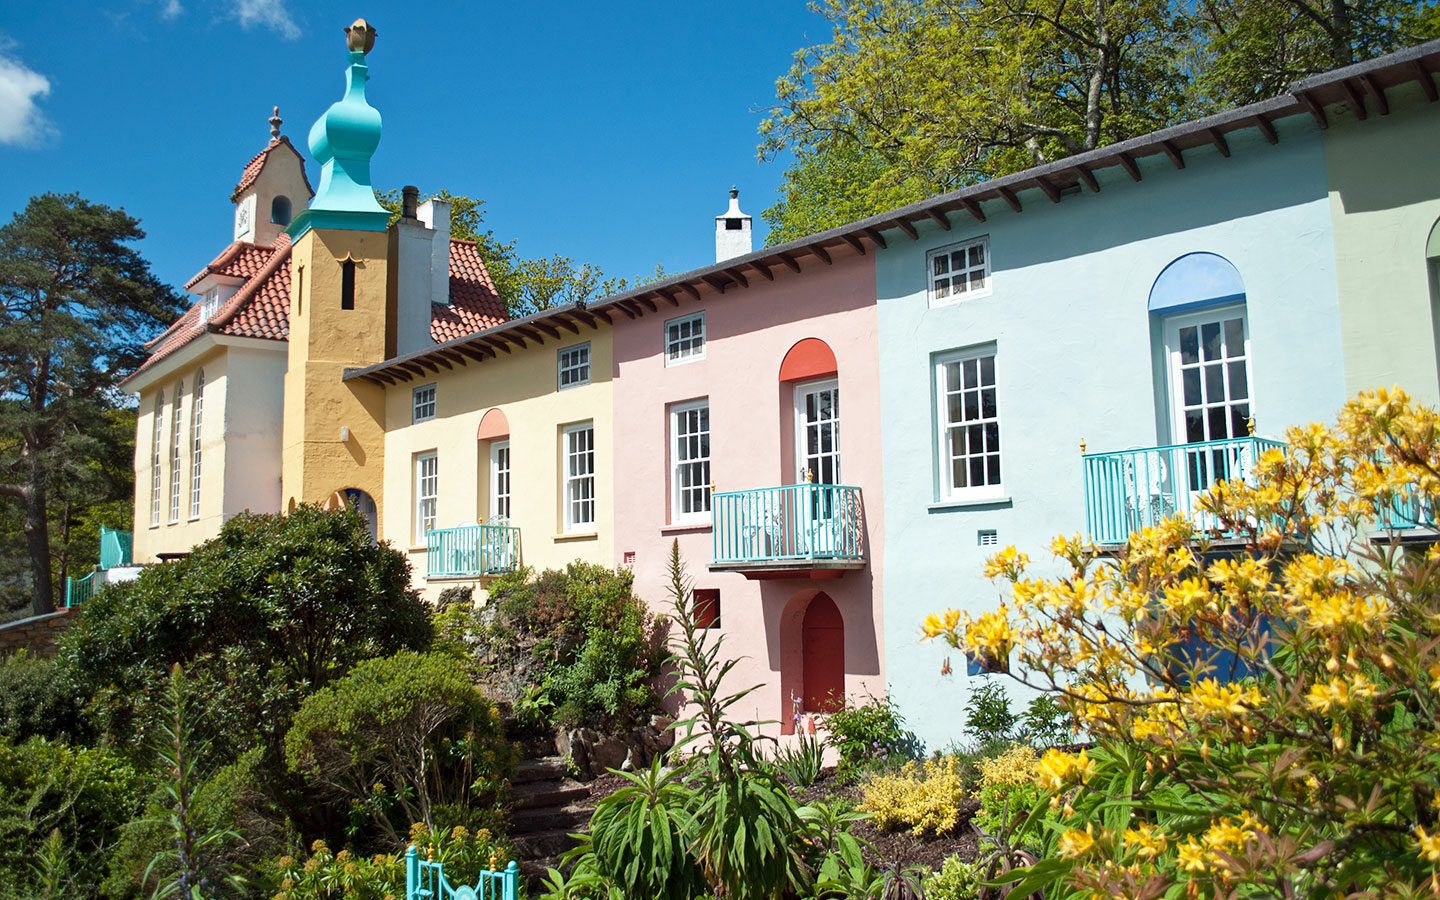 Colourful buildings in Portmeirion in North Wales